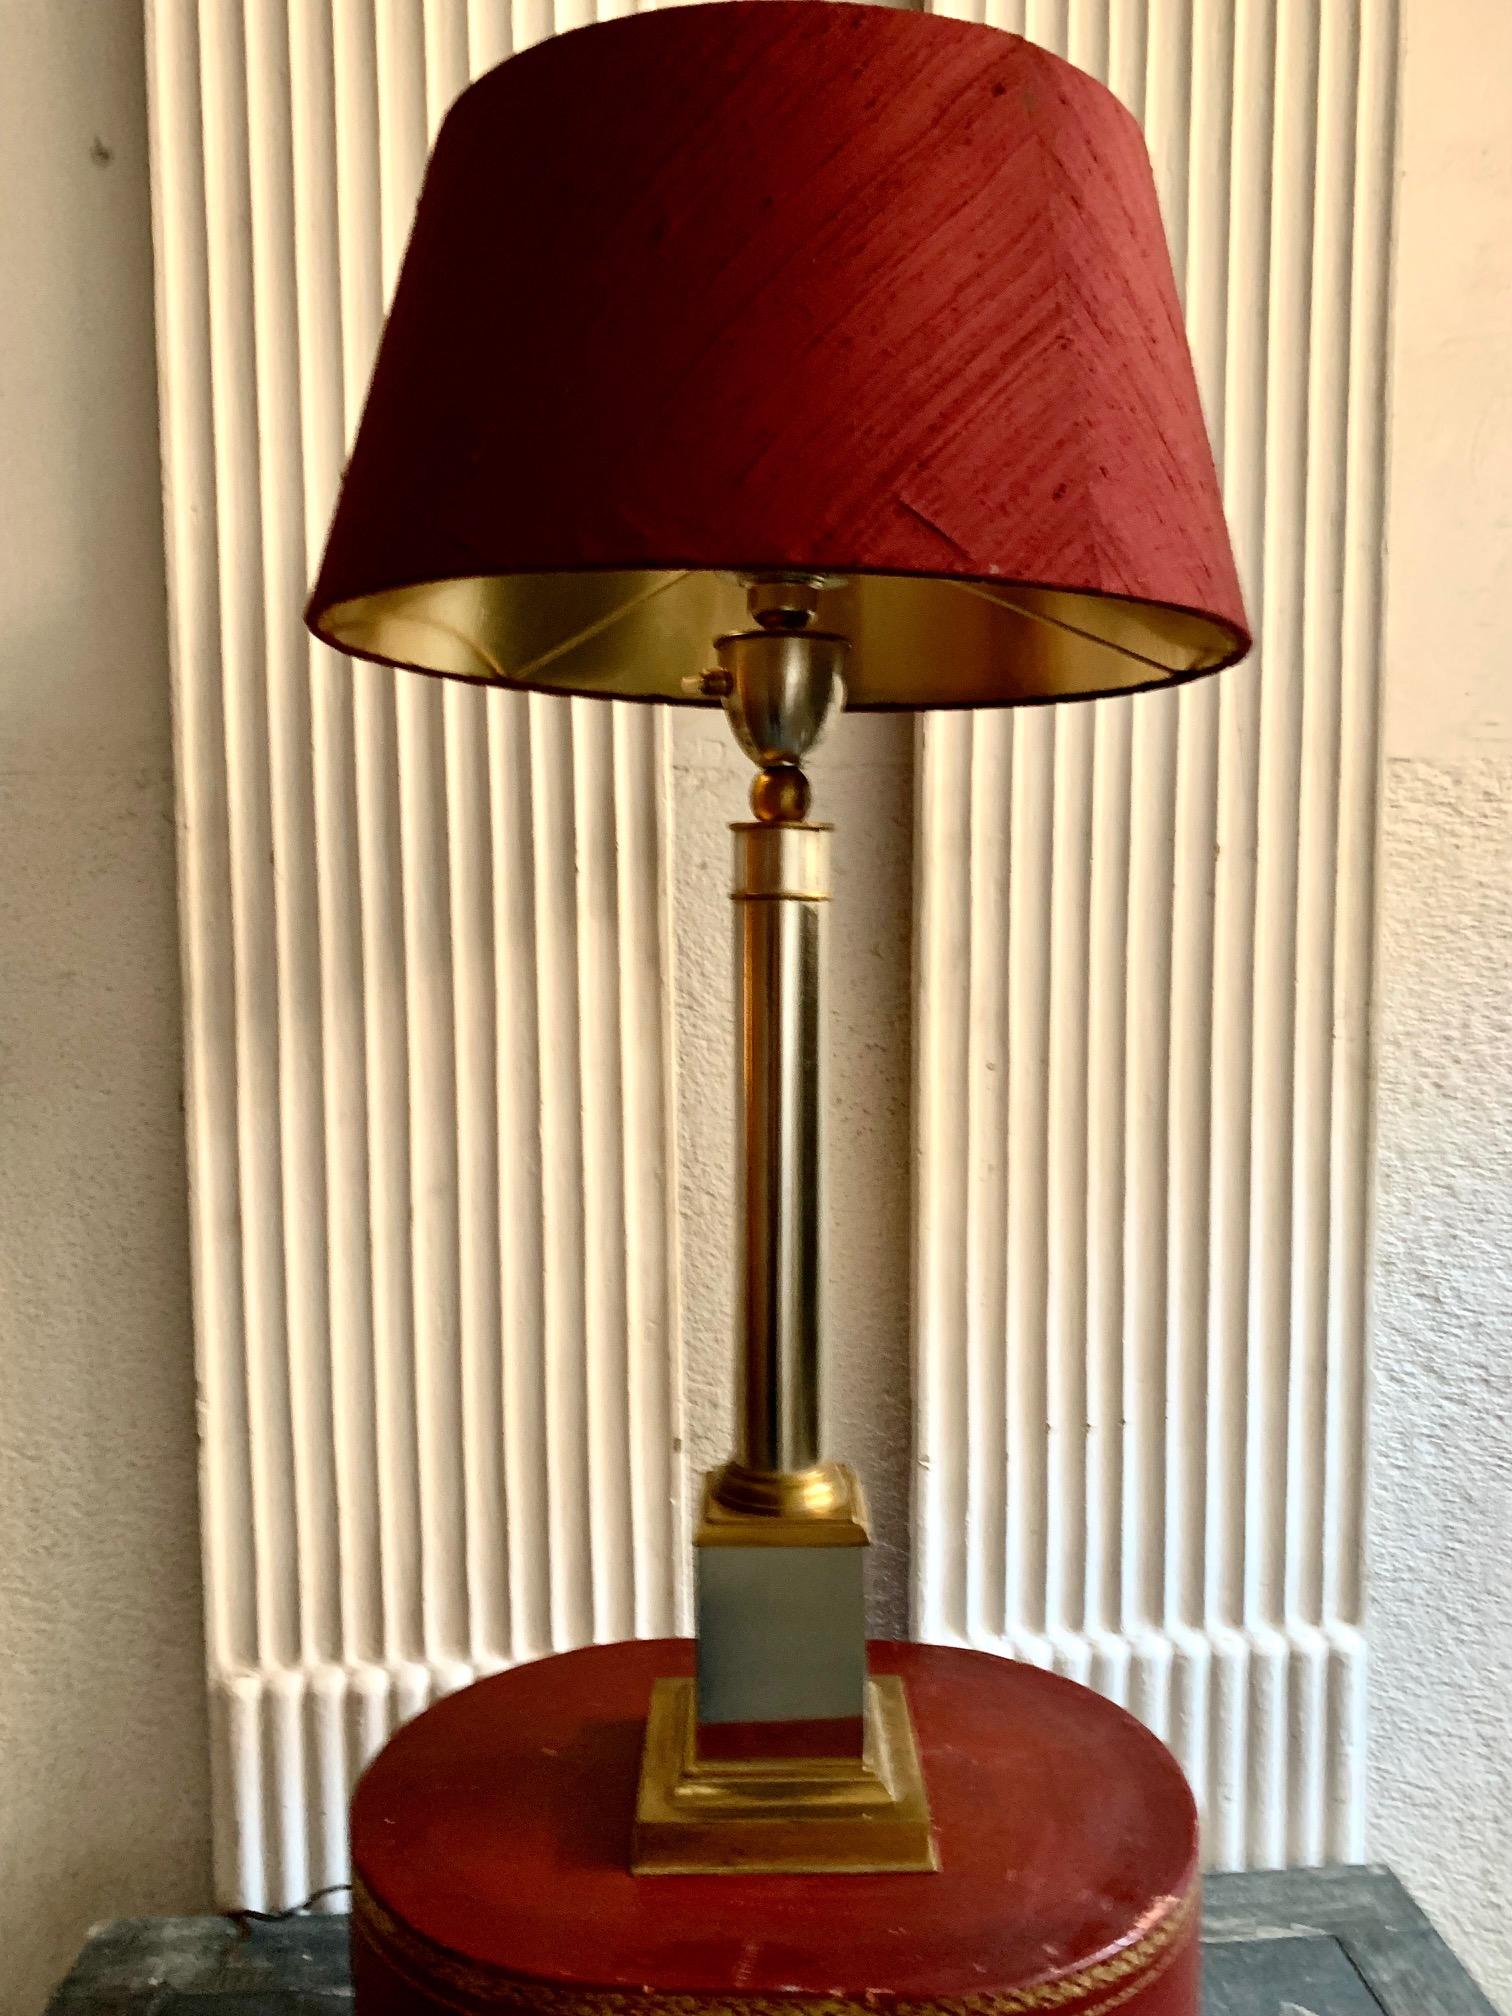 An elegant table lamp attributed to Maison Jansen, in brass and chrome silver metal, in the shape of a column.
The lampshade is made of garnet silk with a gold interior. the measurements of the lamp is without the lampshade, the measurement of the